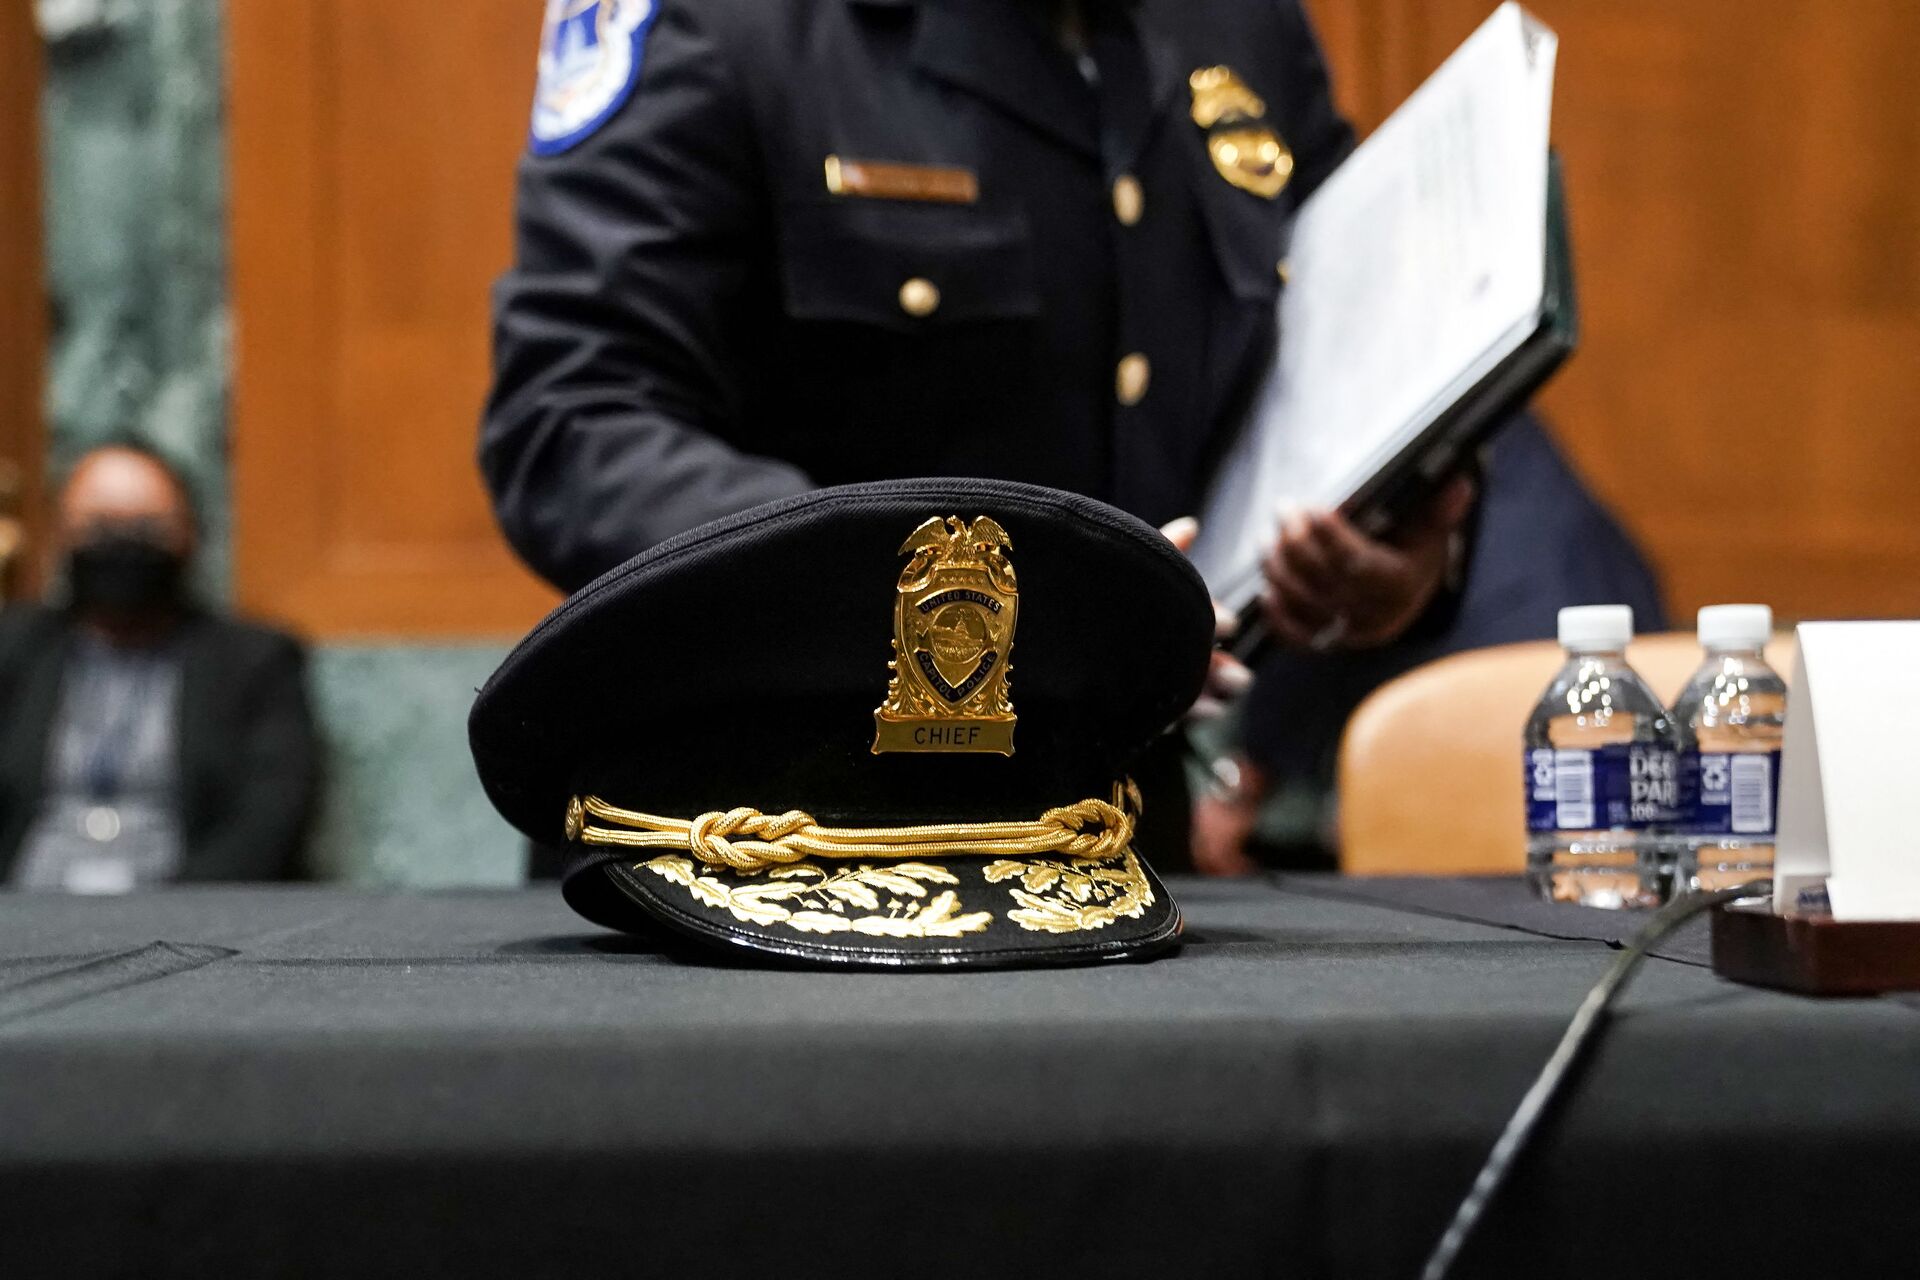 The hat of acting U.S. Capitol Police chief Yogananda Pittman sits on the table before an Appropriations Subcommittee hearing on Capitol Hill on April 21, 2021 in Washington, DC. The committee is hearing testimony on the FY 2022 budget request for the Architect of the Capitol, Senate Sergeant of Arms and the U.S. Capitol Police.  - Sputnik International, 1920, 07.09.2021